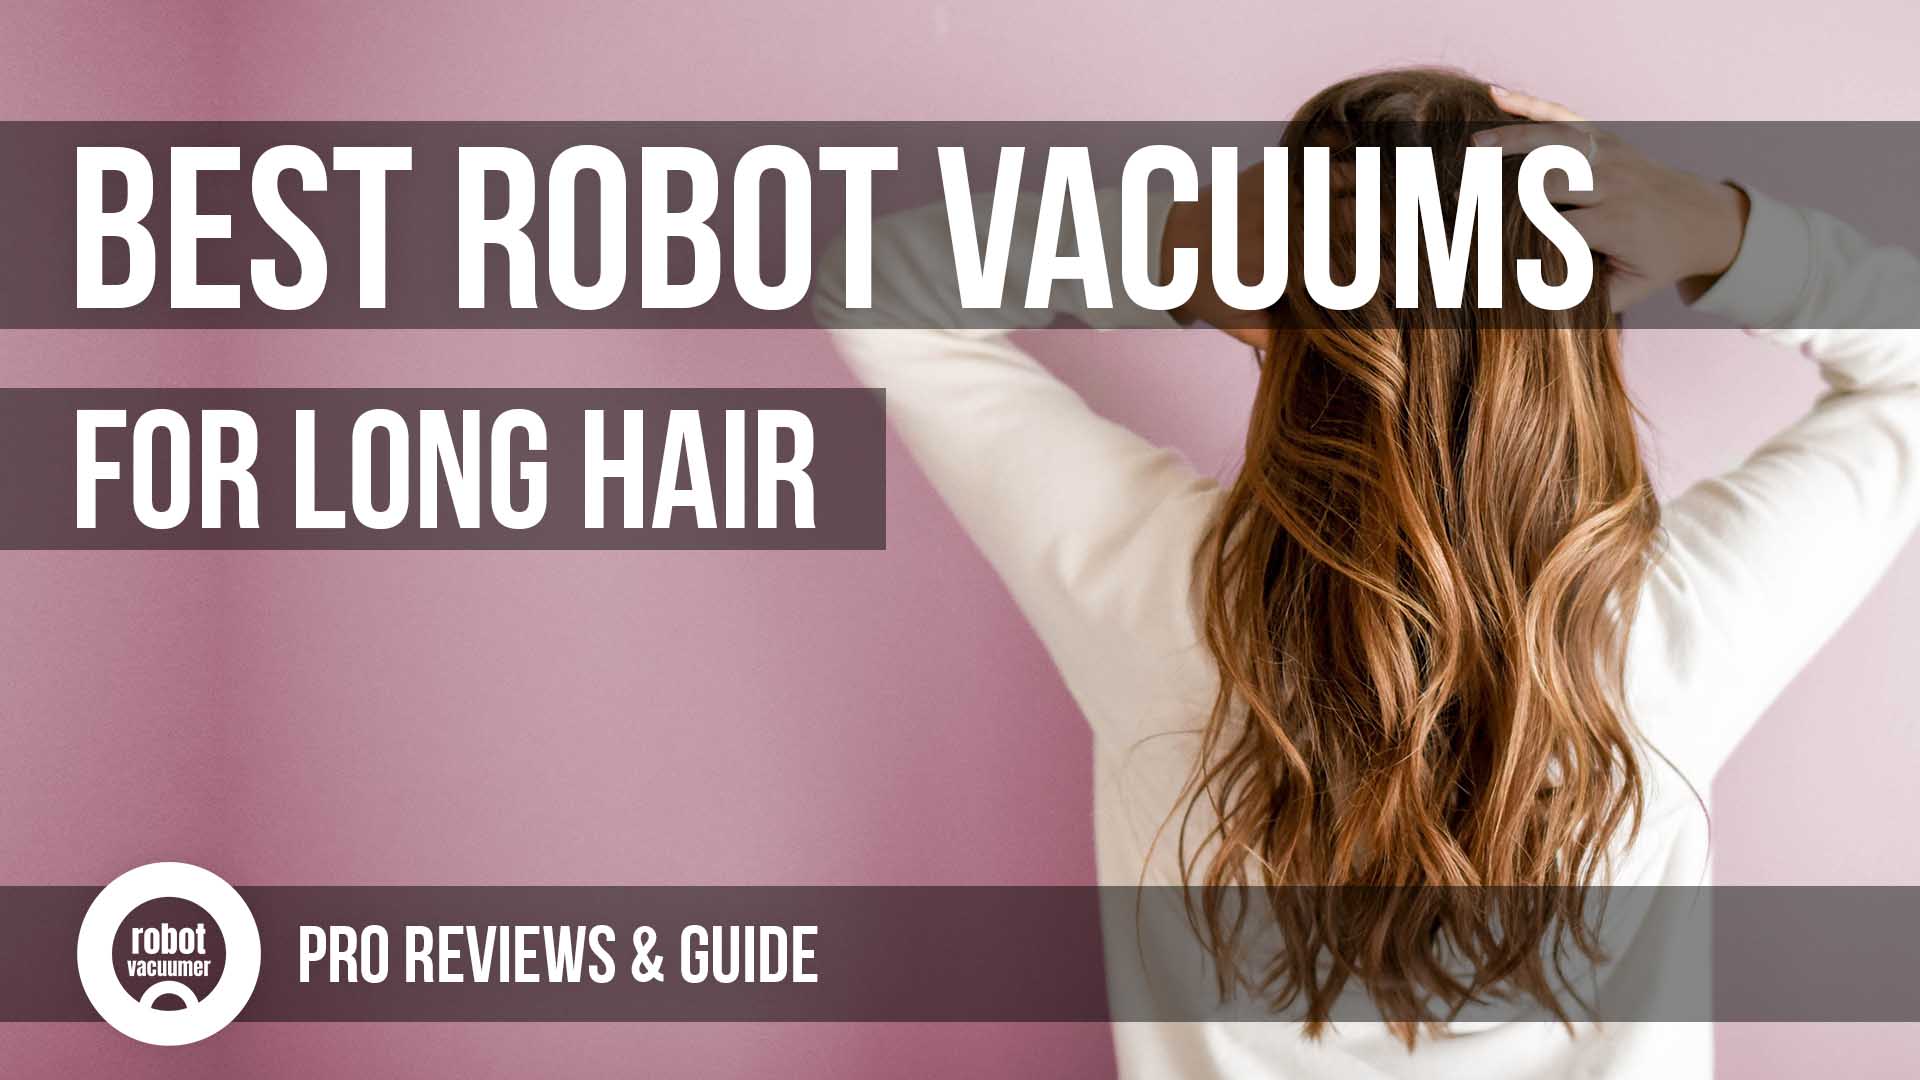 Best Robot Vacuums for Long Hair 2020 